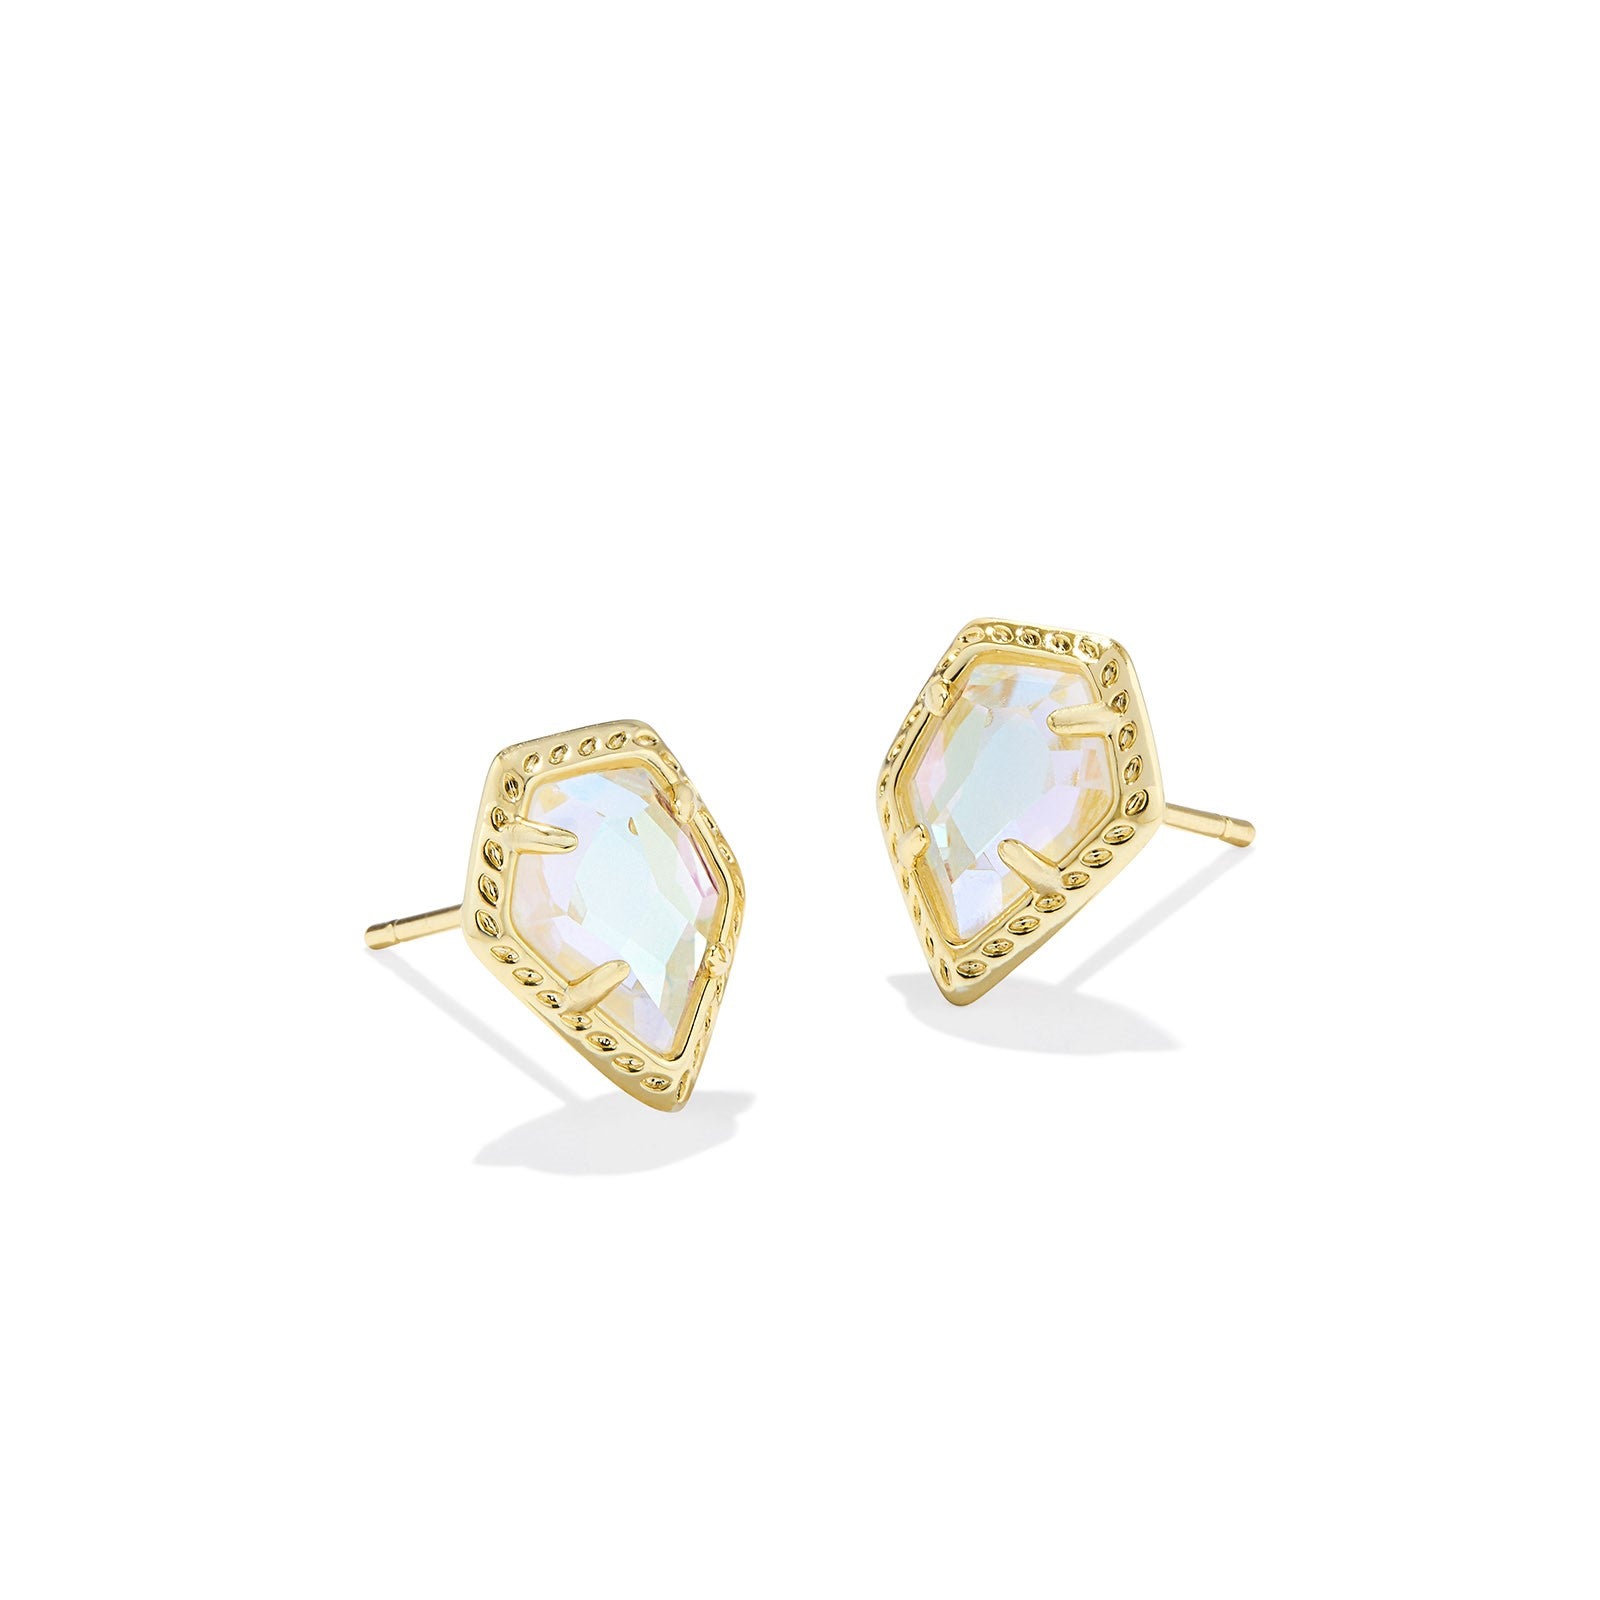 Kendra Scott | Framed Tessa Gold Stud Earrings in Dichroic Glass - Giddy Up Glamour Boutique